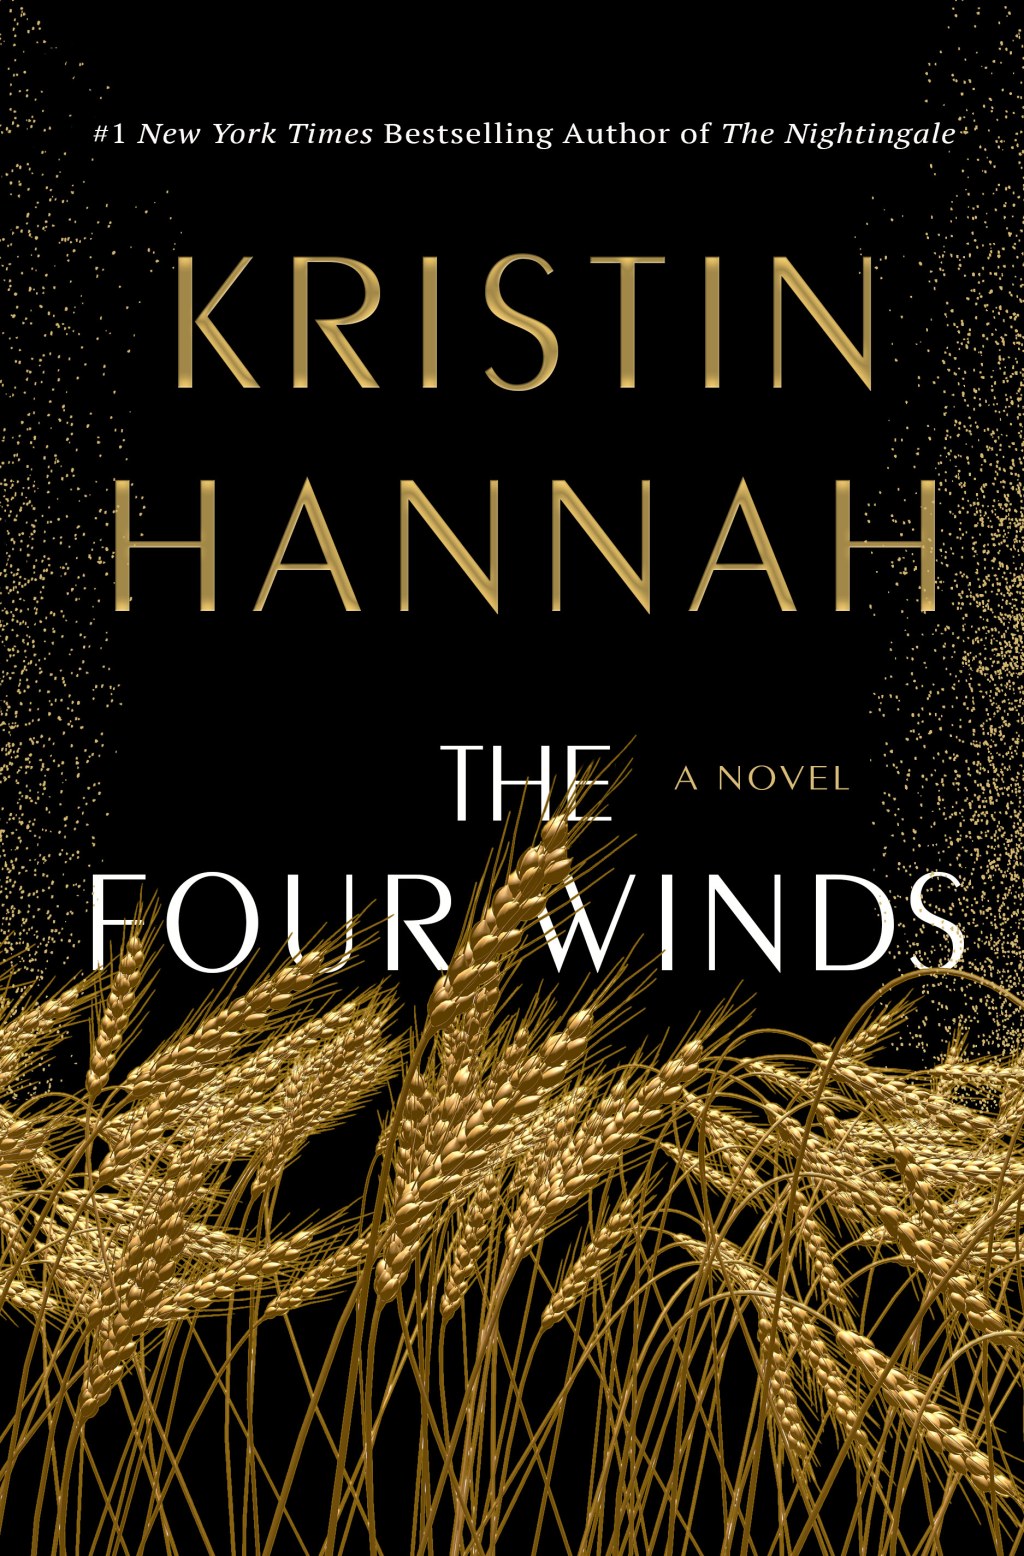 Picture of: The Four Winds by Kristin Hannah  Goodreads